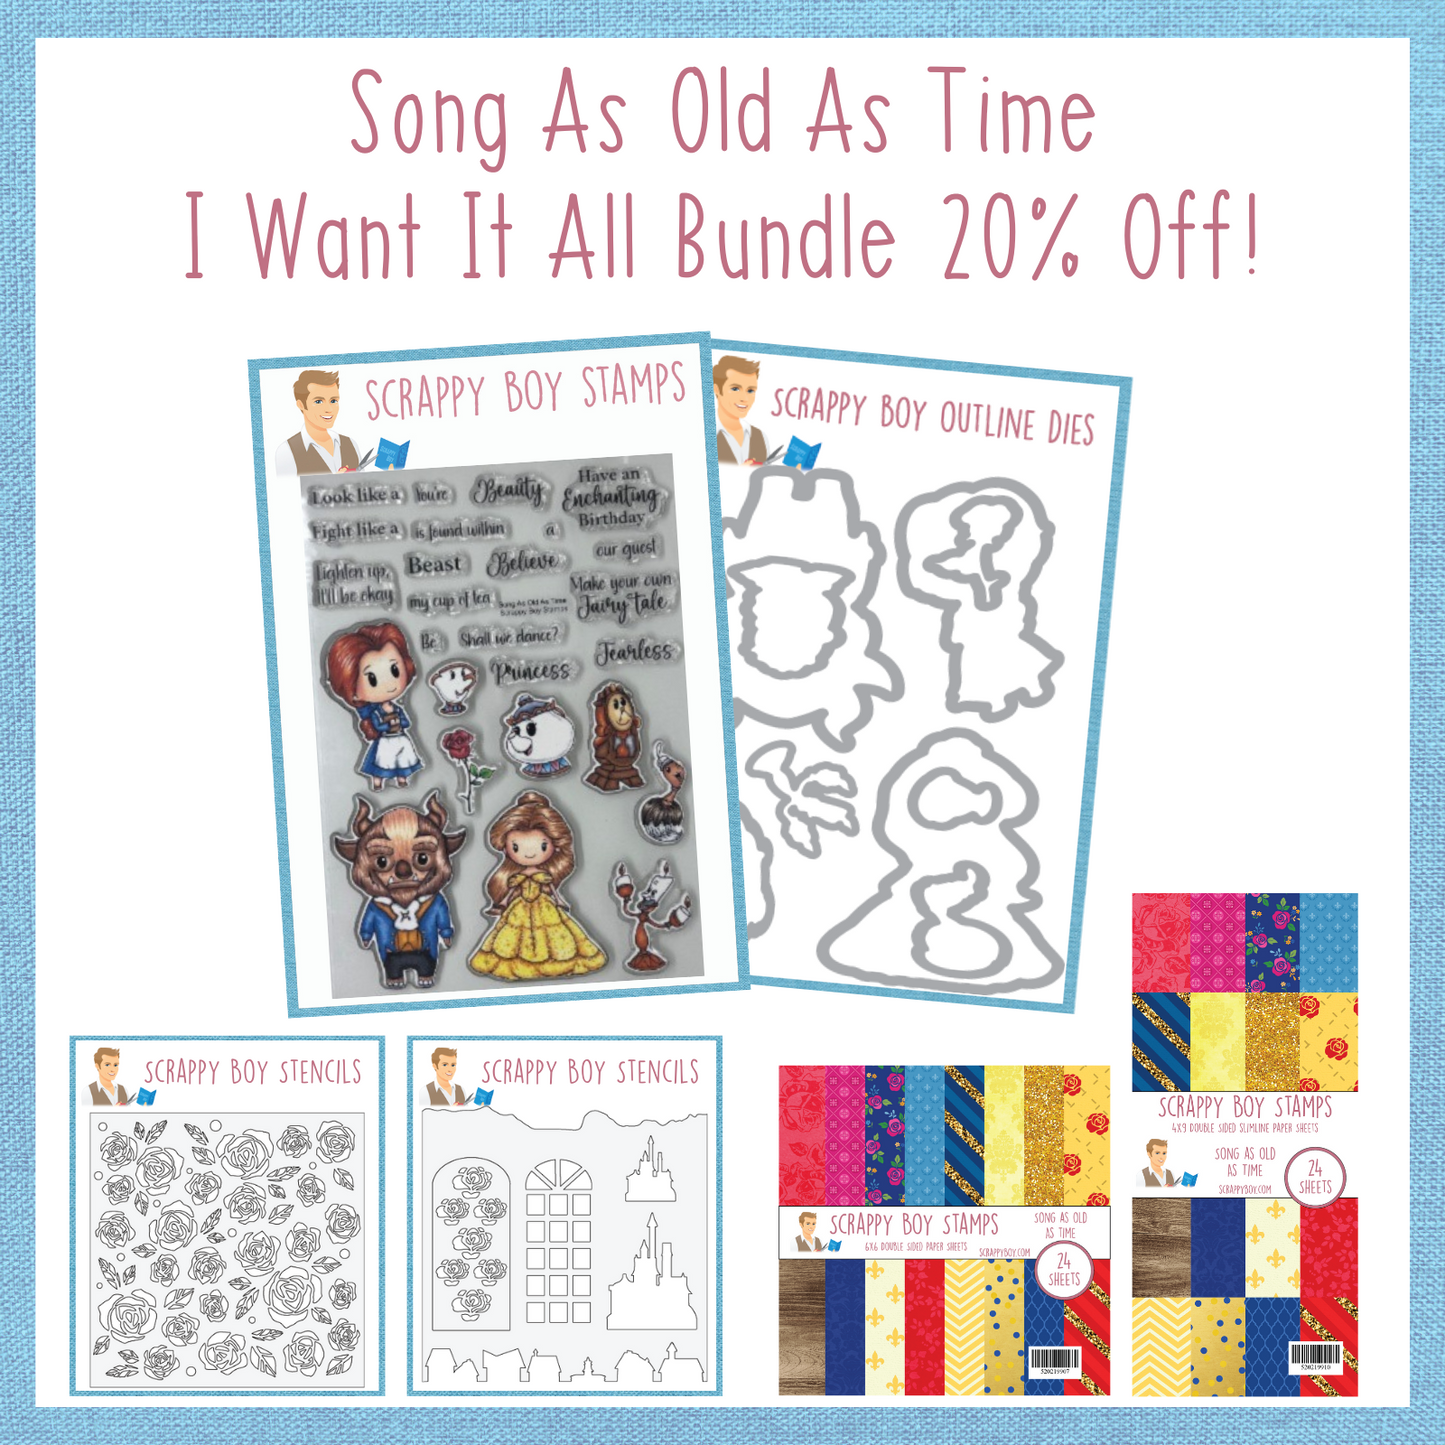 I Want It All Bundle - Song As Old As Time scrappyboystamps